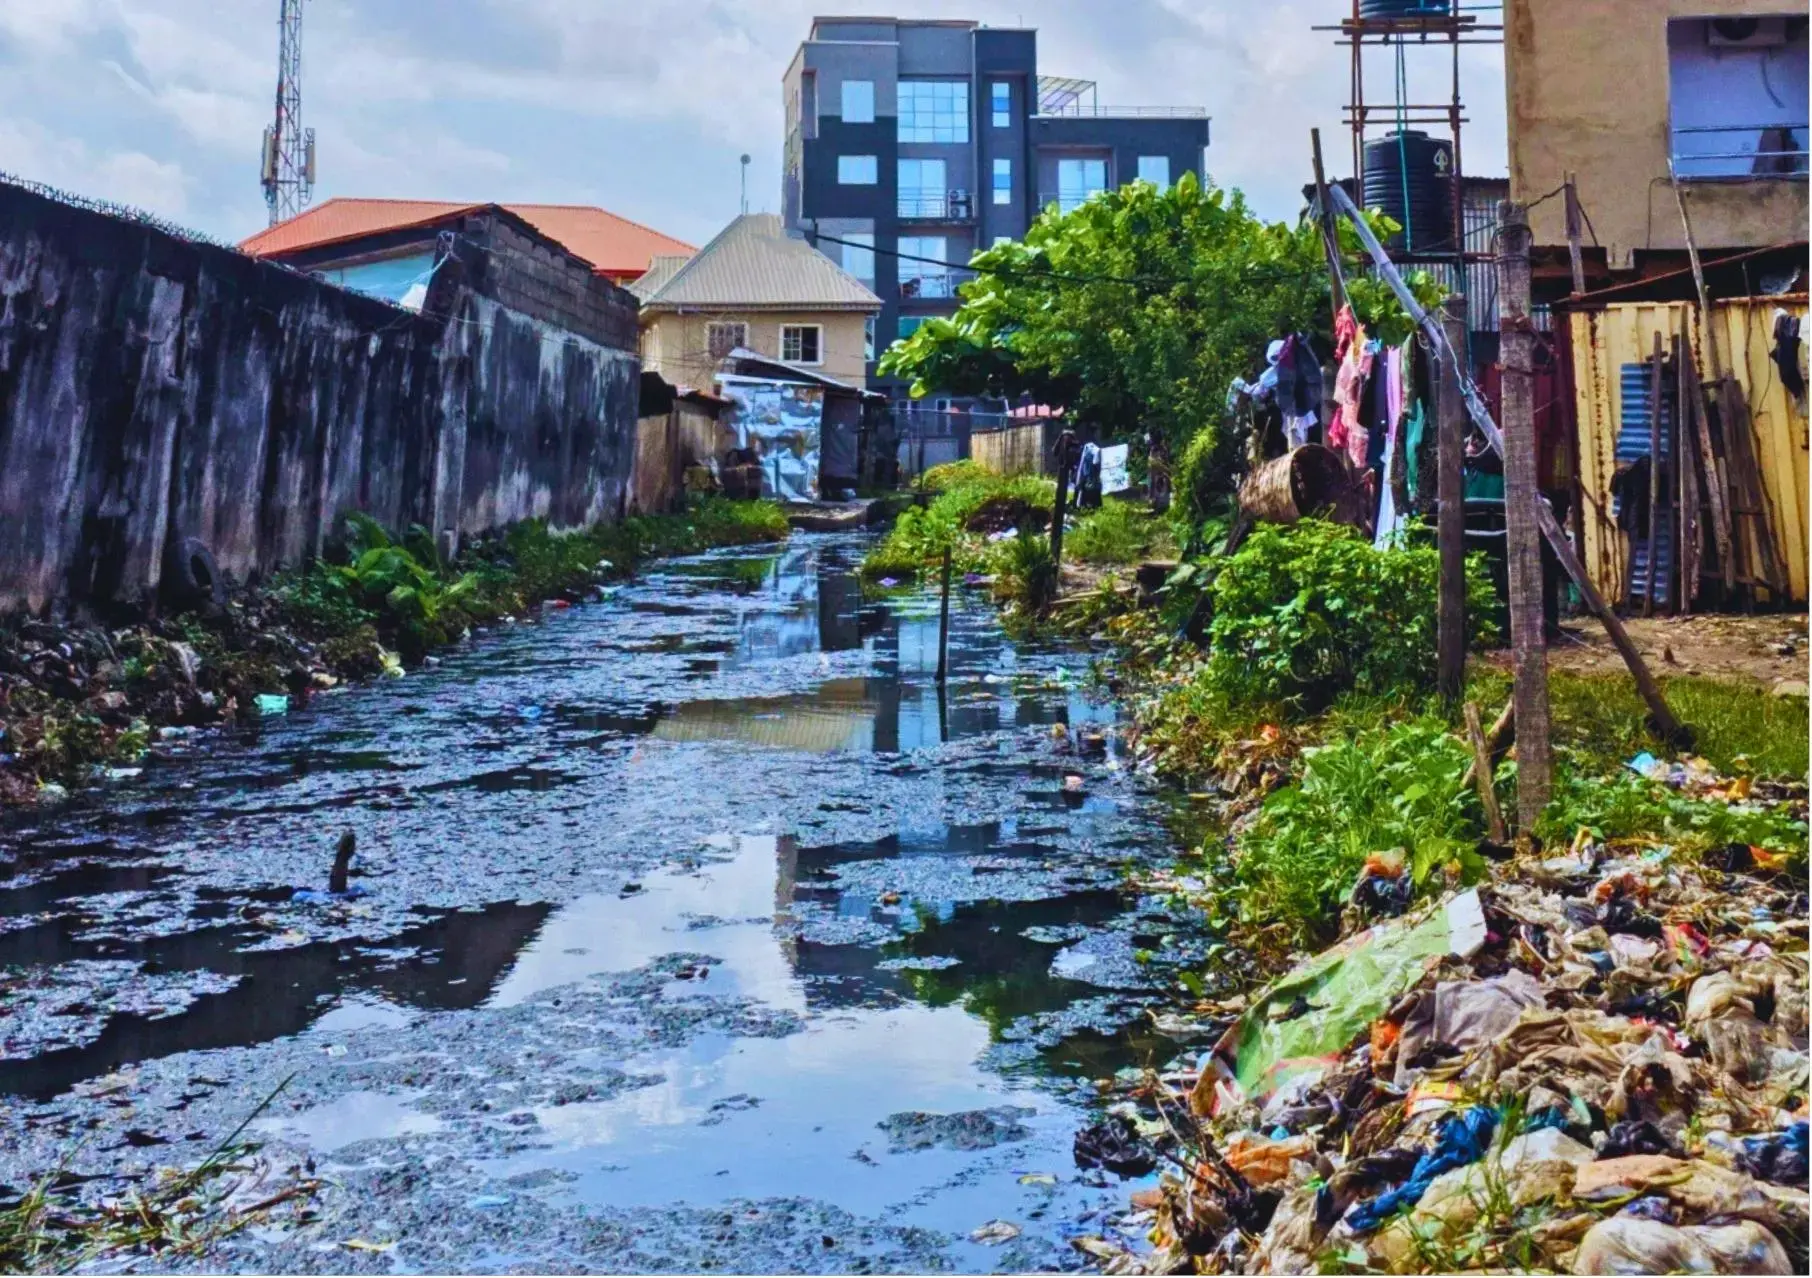 Canal turned into a refuse dumping site because of its proximity to residential homes, Lagos, Nigeria, 2023.